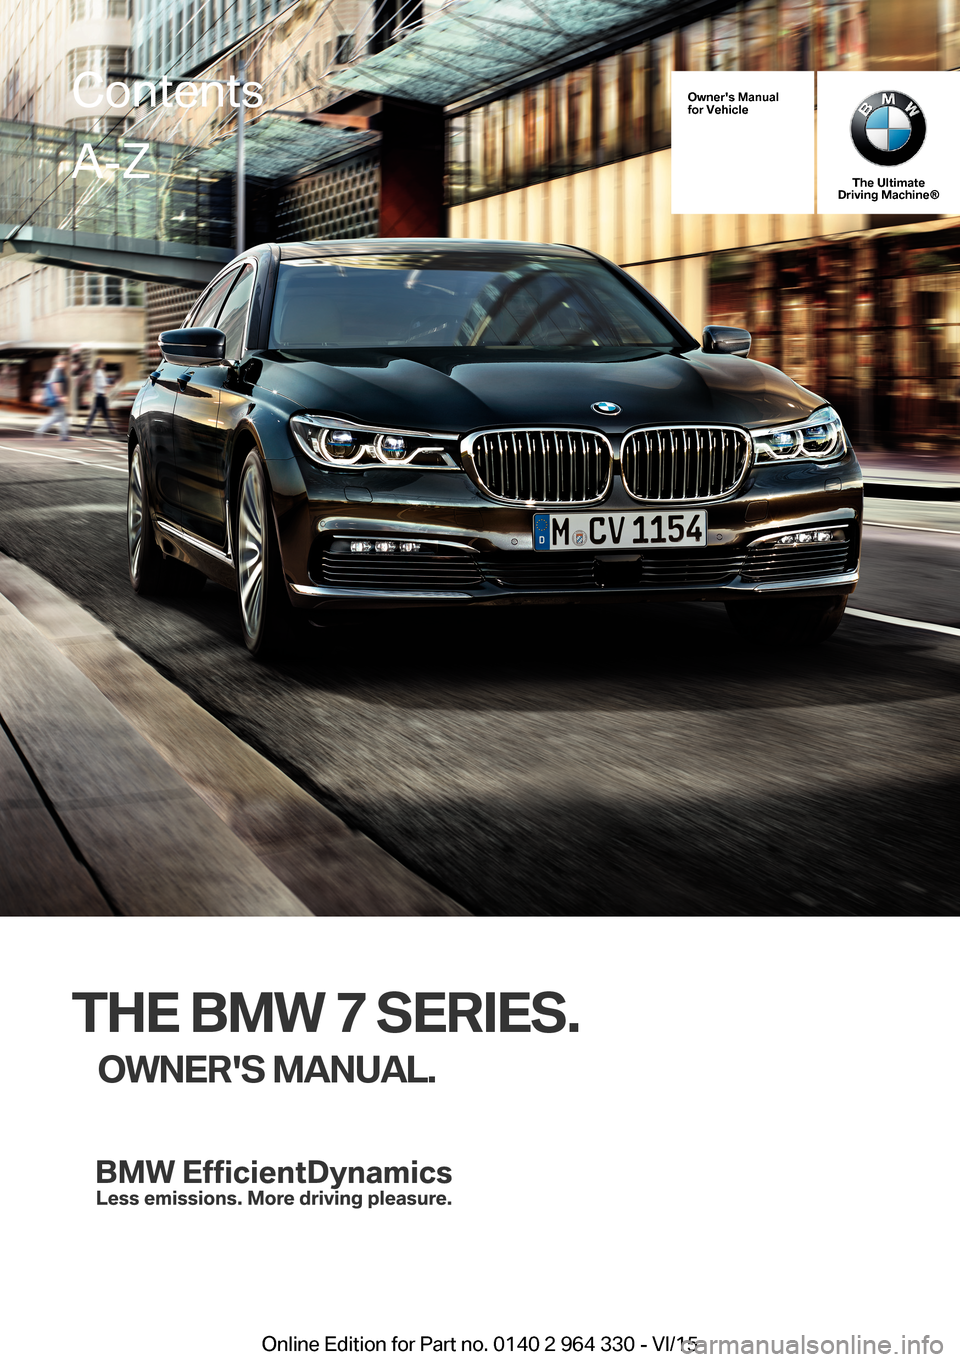 BMW 7 SERIES 2015 G11 Owners Manual Owners Manualfor Vehicle
The UltimateDriving Machine®
THE BMW 7 SERIES.
OWNERS MANUAL.ContentsA-Z
Online Edition for Part no. 0140 2 964 330 - VI/15   